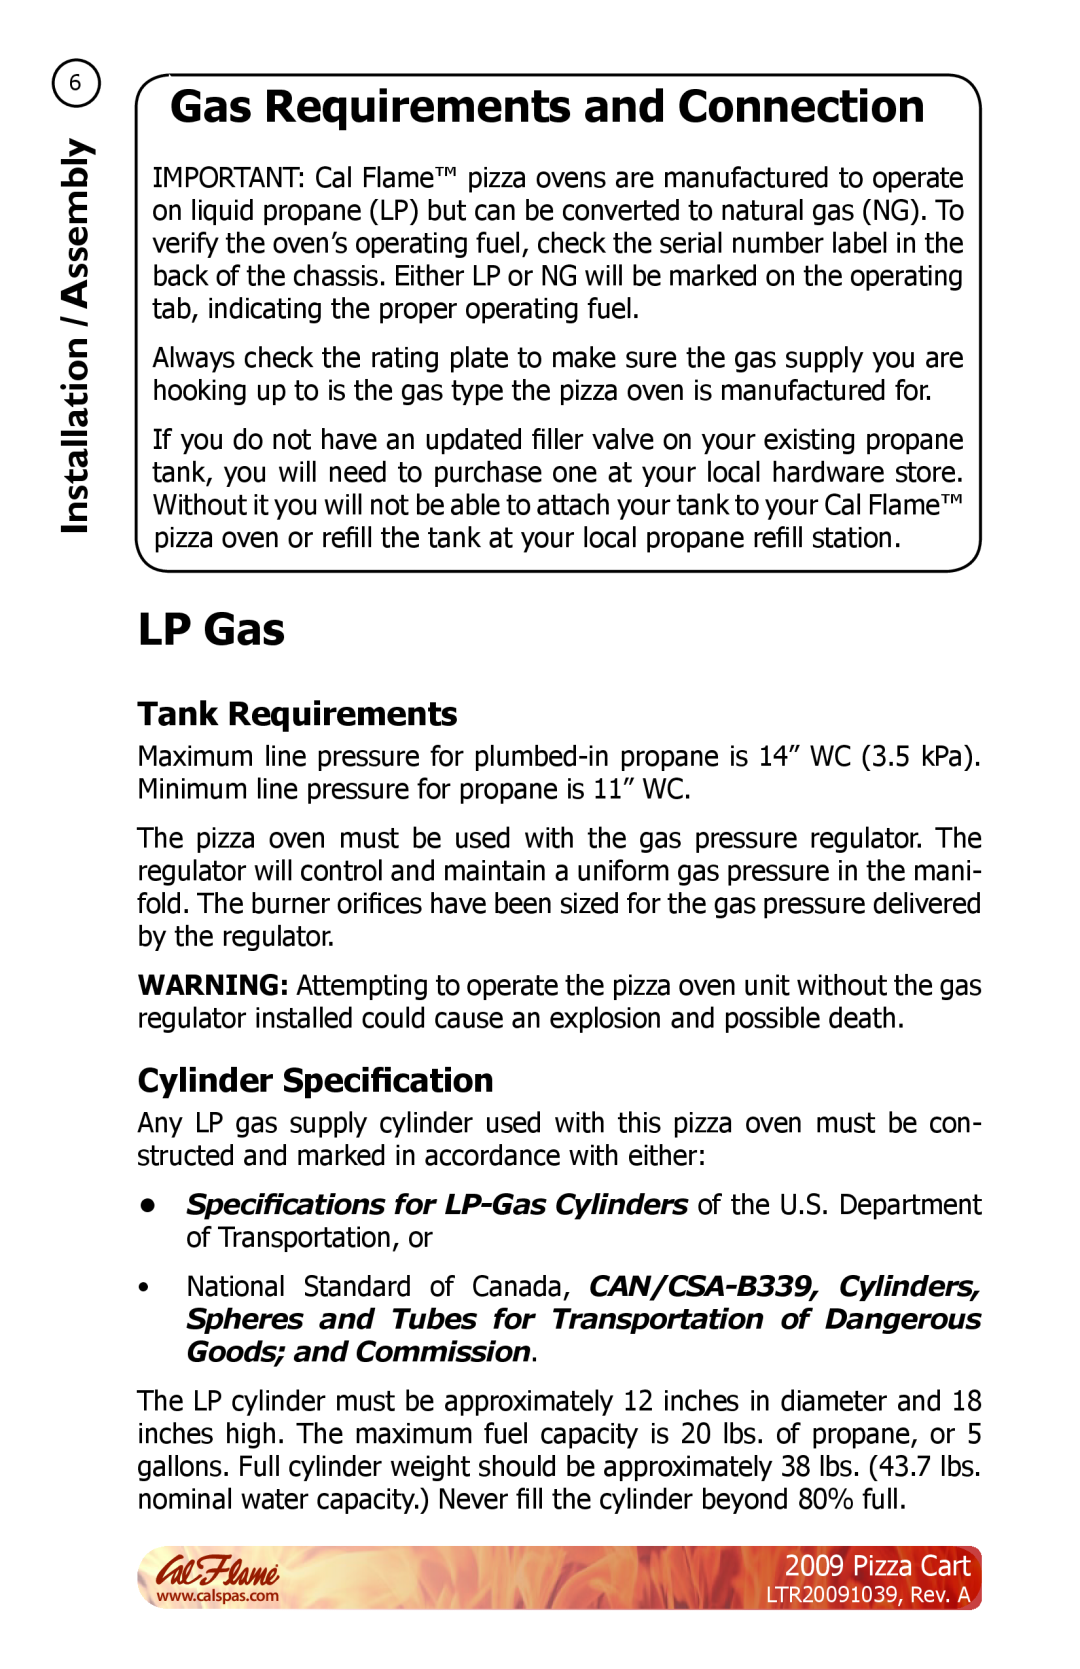 Cal Flame LTR20091039 manual Gas Requirements and Connection, LP Gas, Tank Requirements, Cylinder Specification, Pizza Cart 